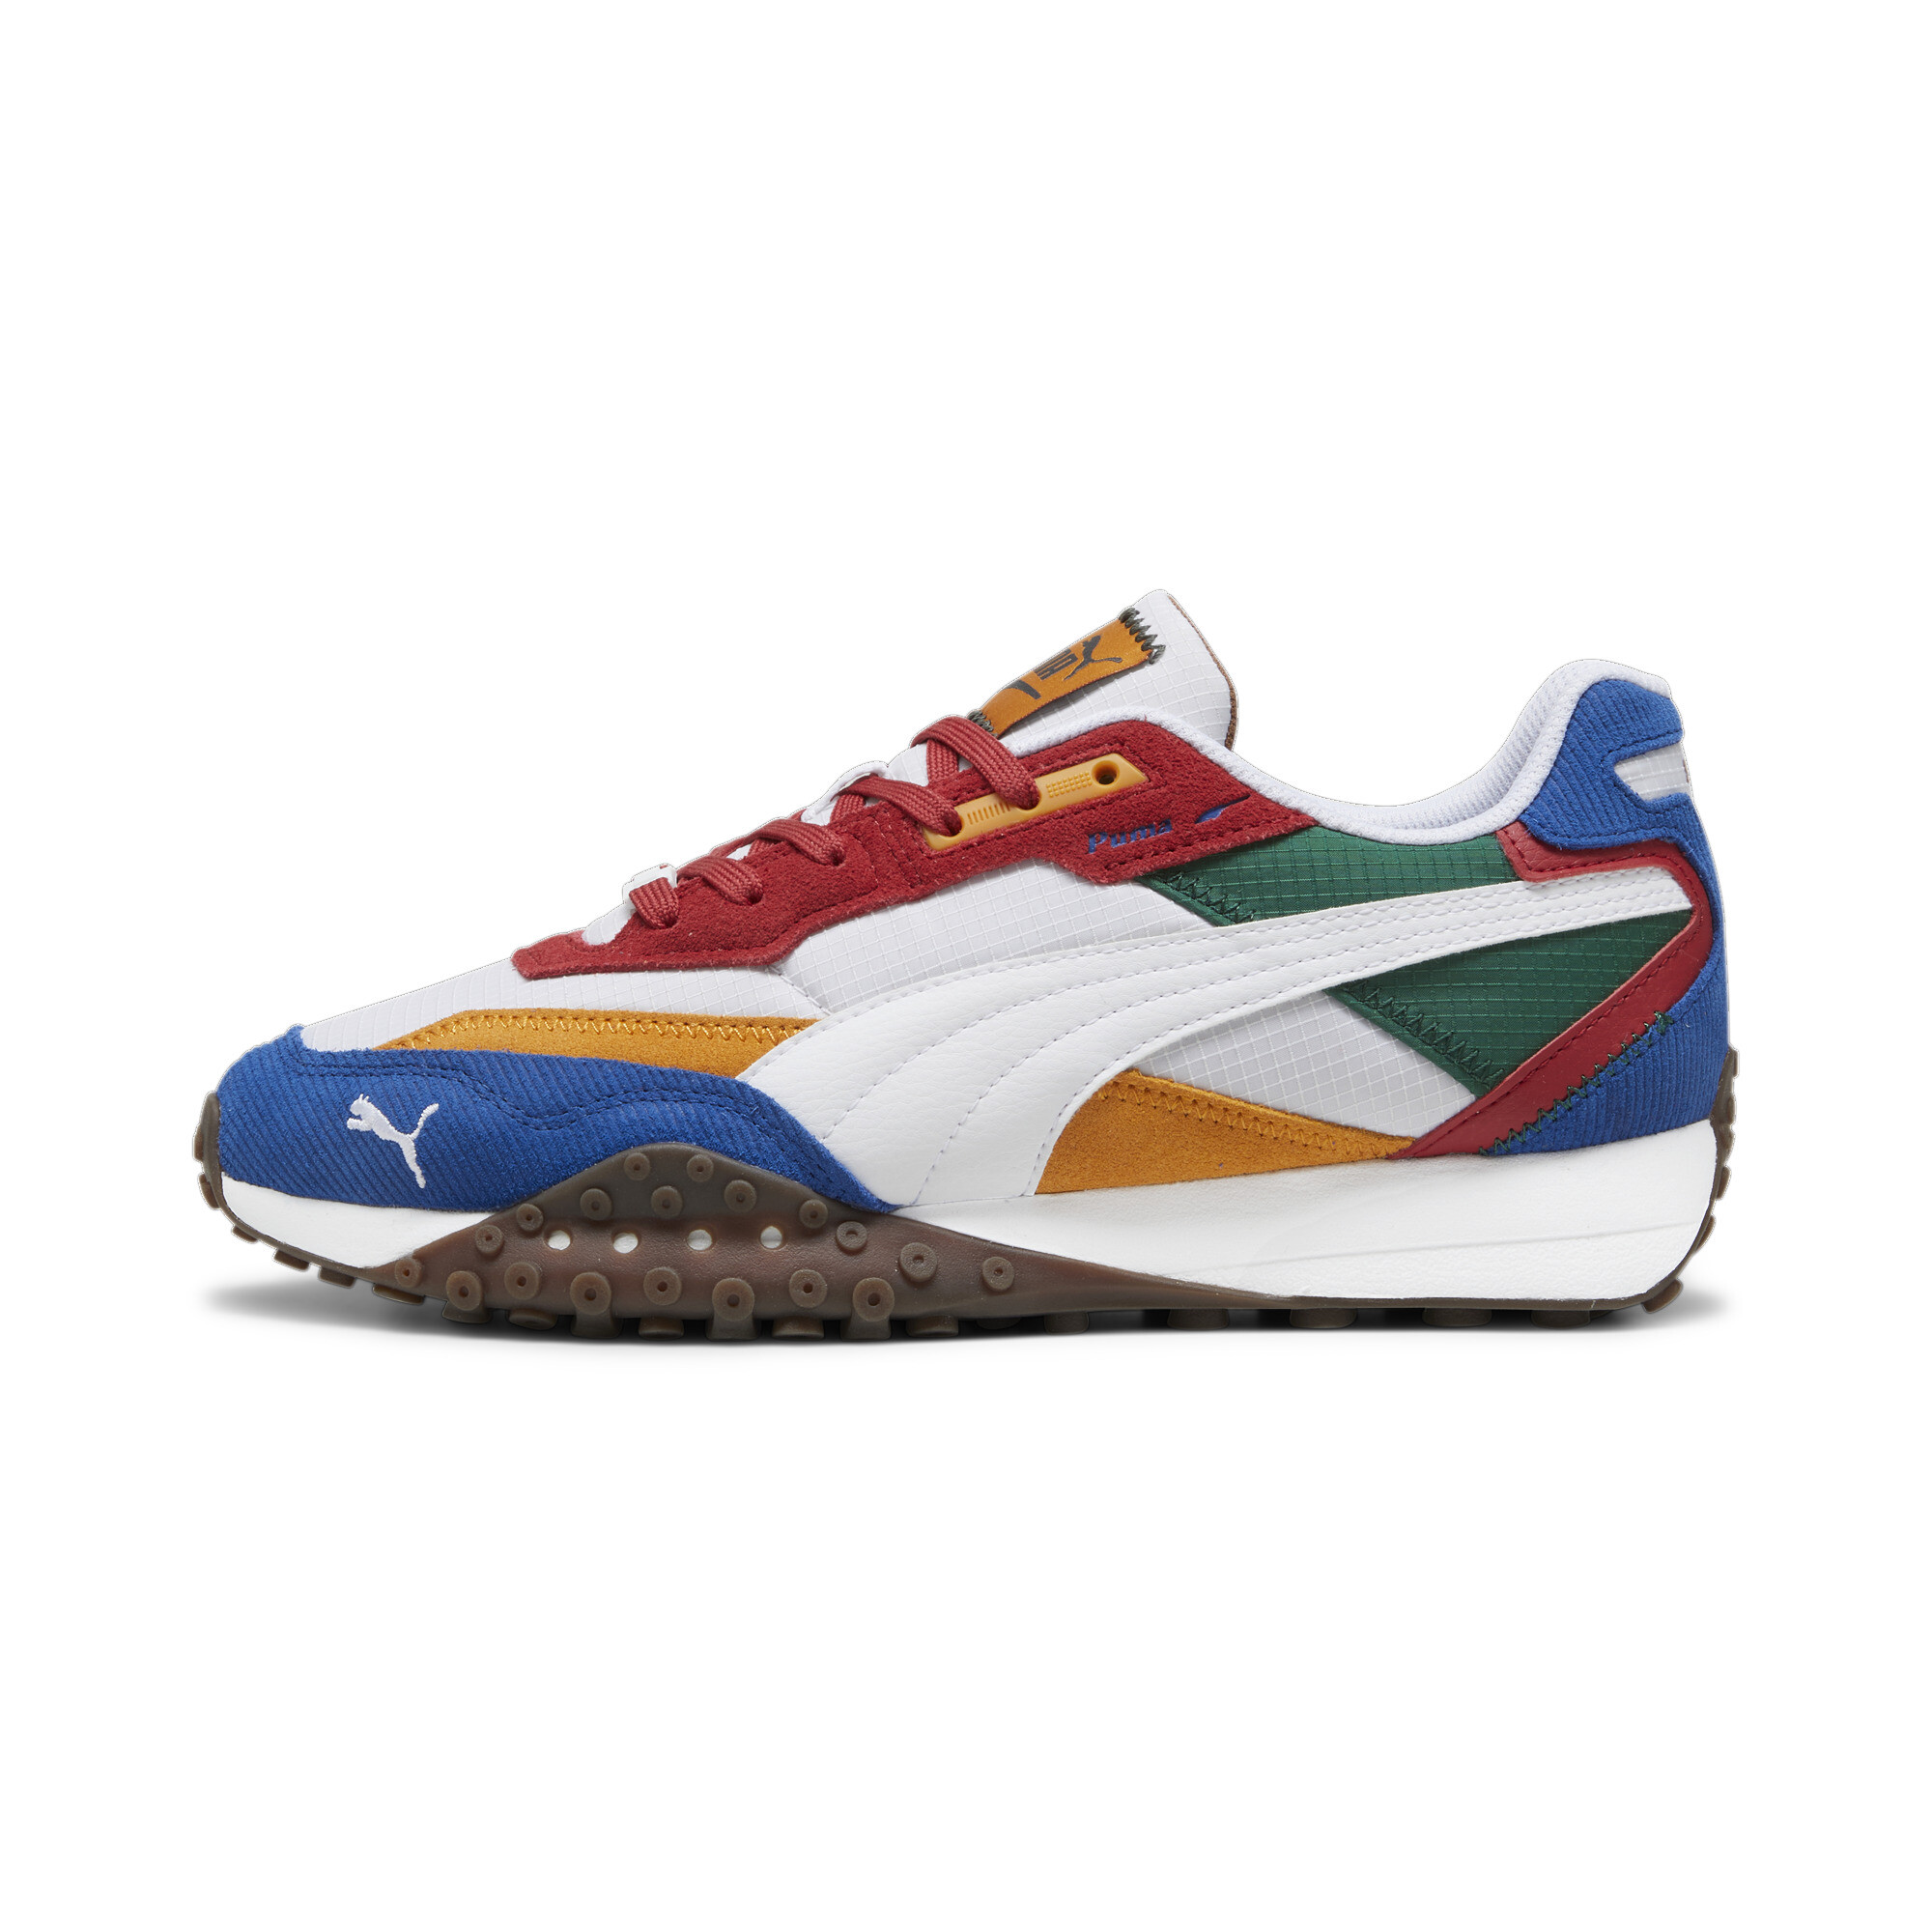 Puma Blktop Rider Multicolor Sneakers, White, Size 44, Shoes